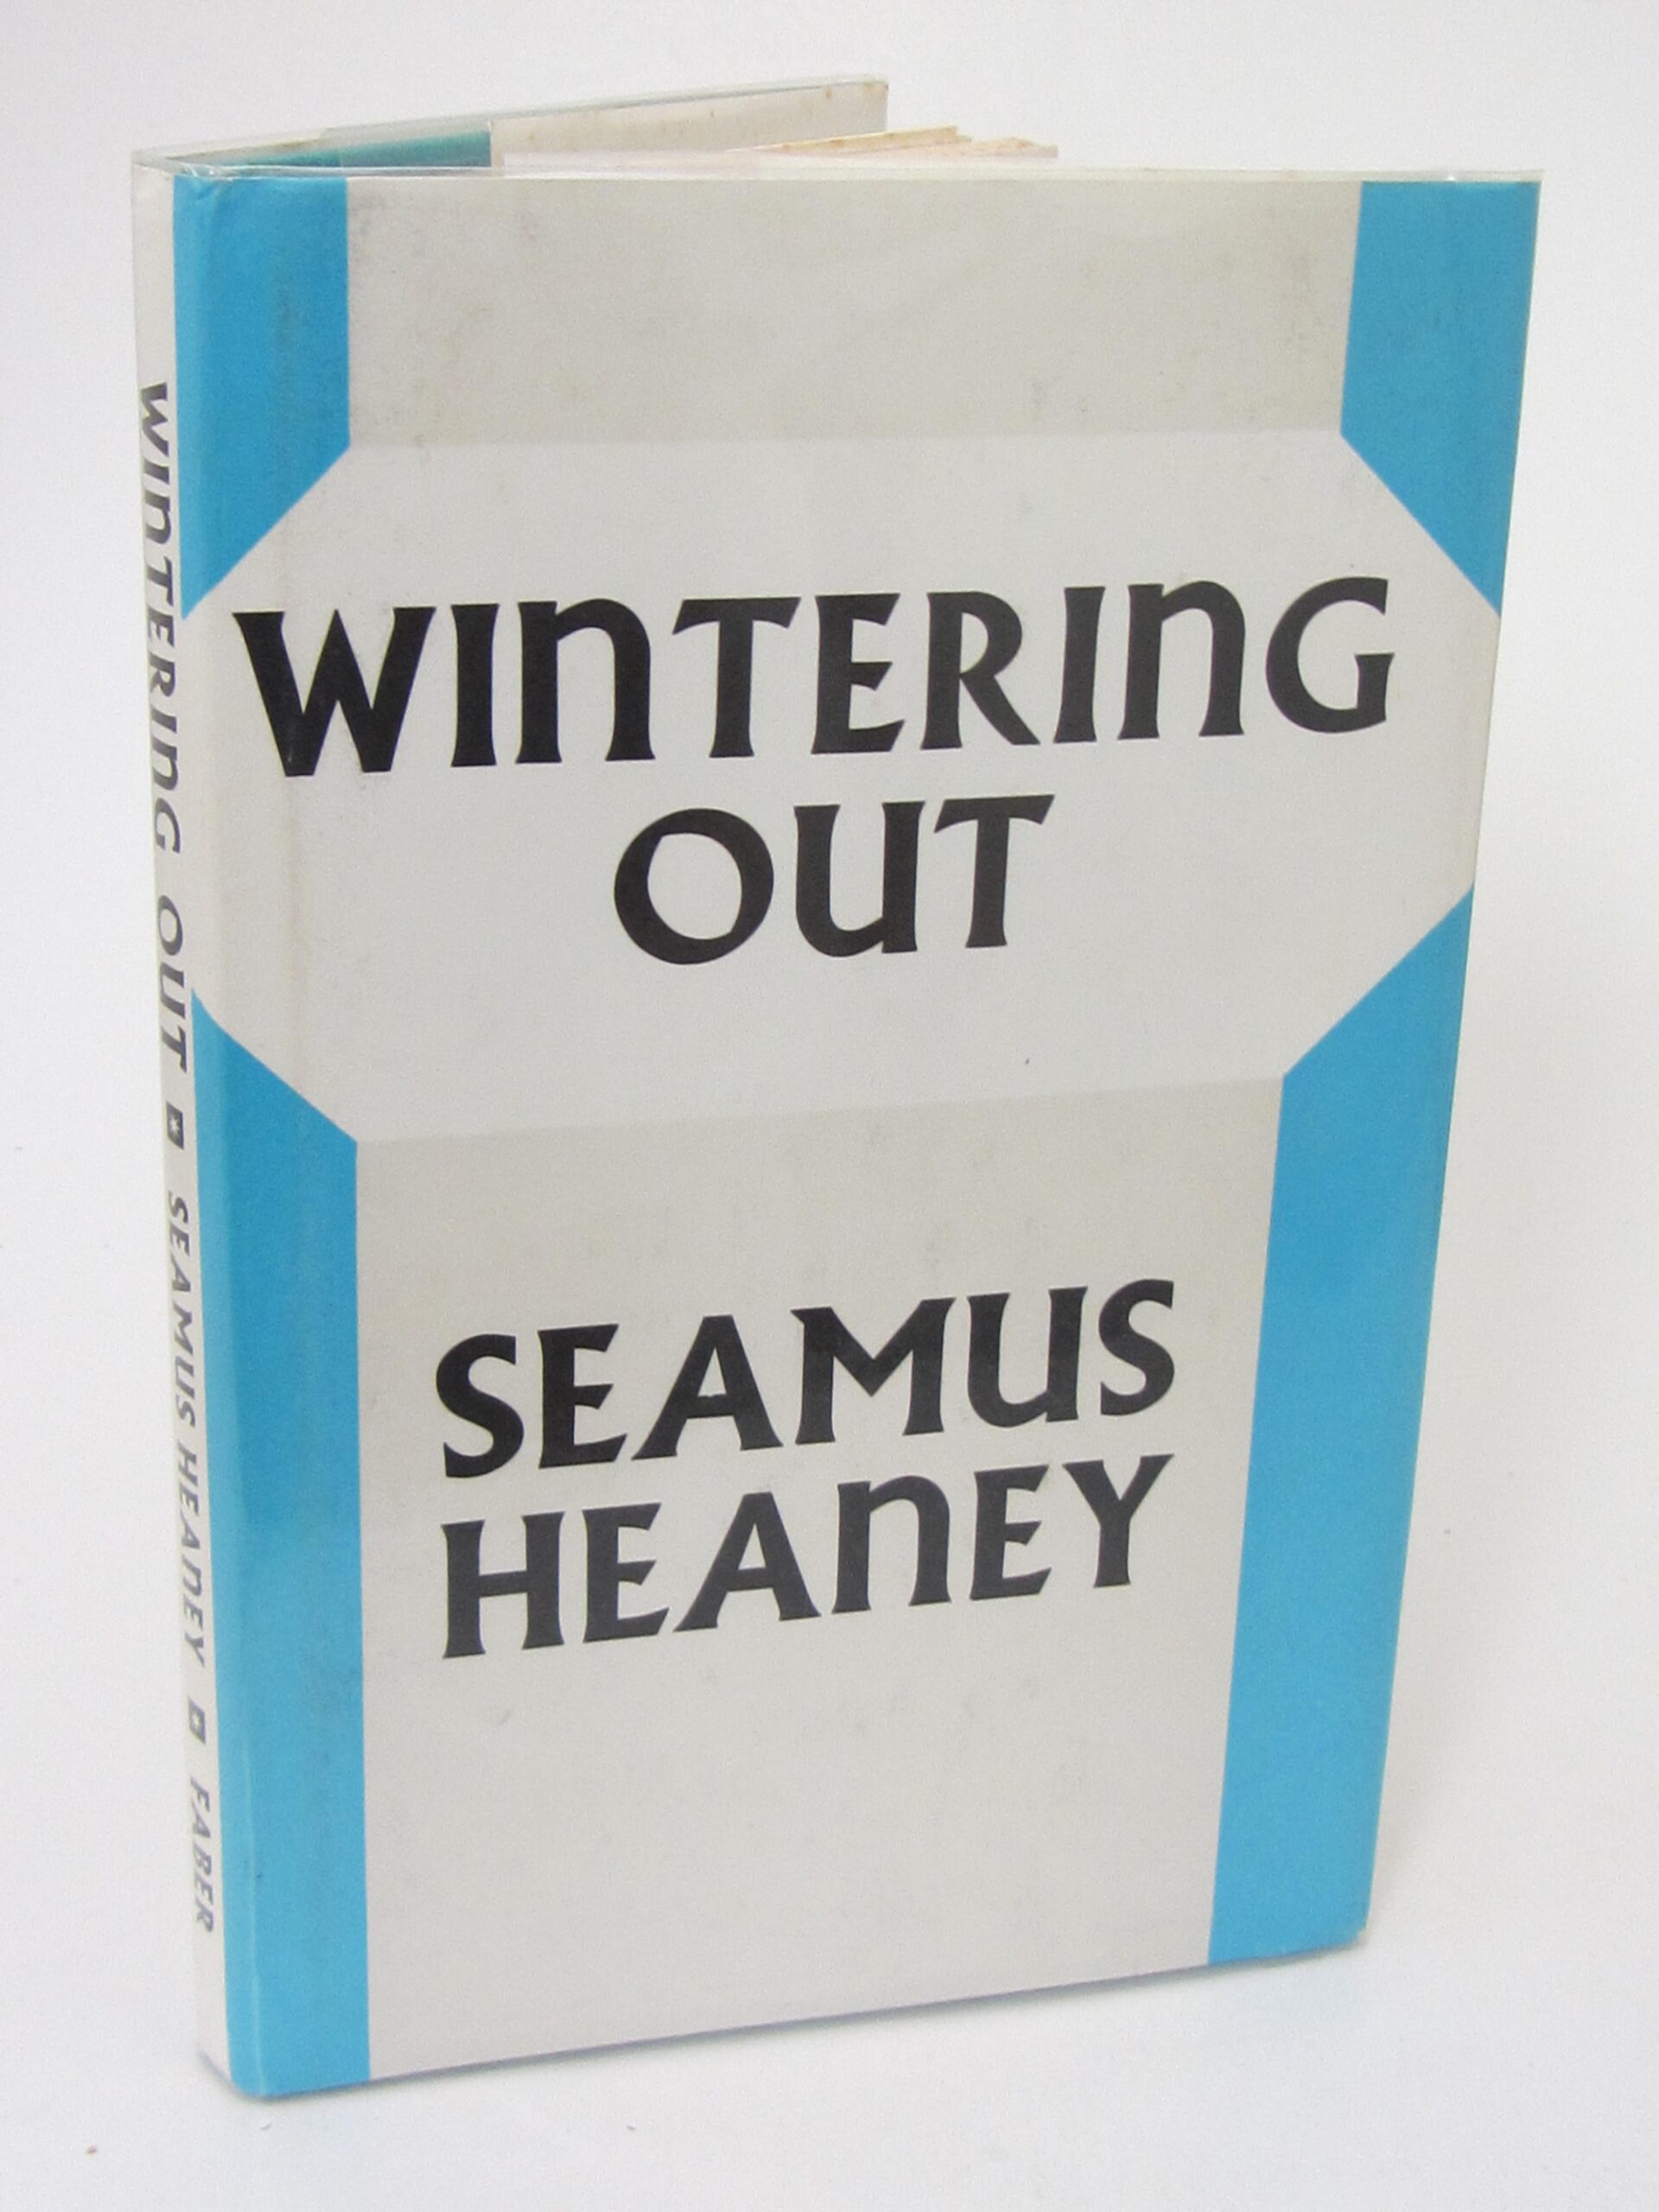 Wintering Out. First Edition In Hardback (1973) by Seamus Heaney